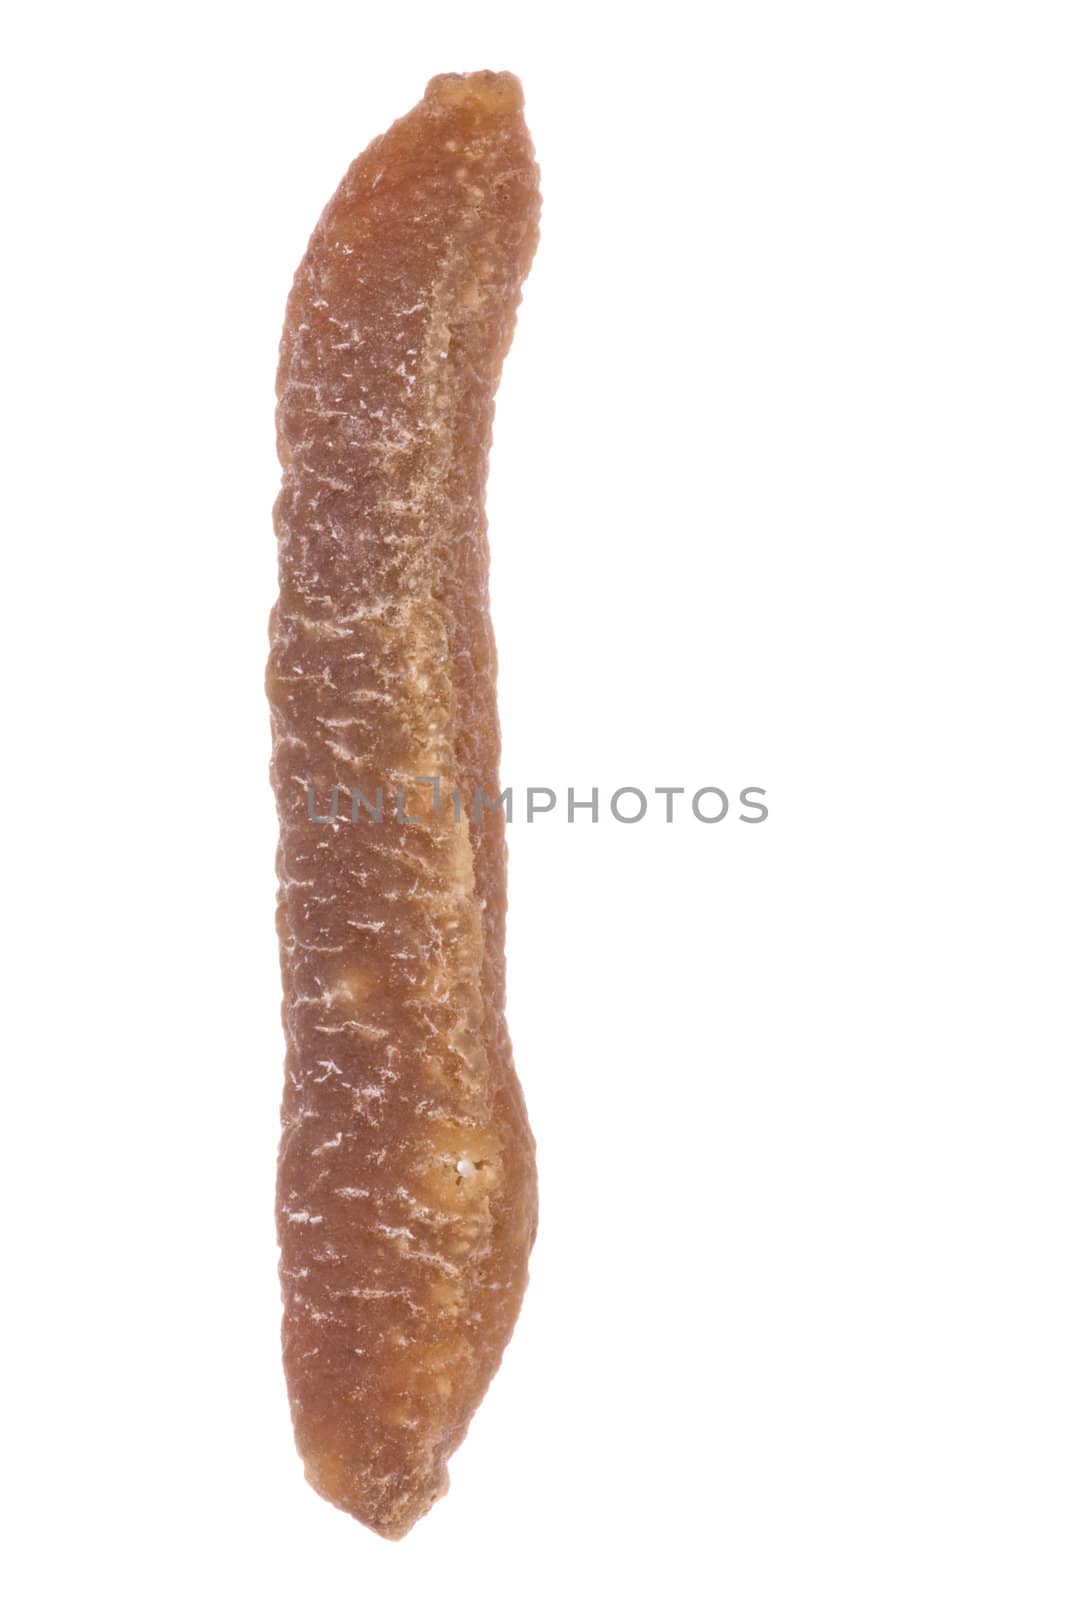 Dried Sea Cucumber Isolated by shariffc